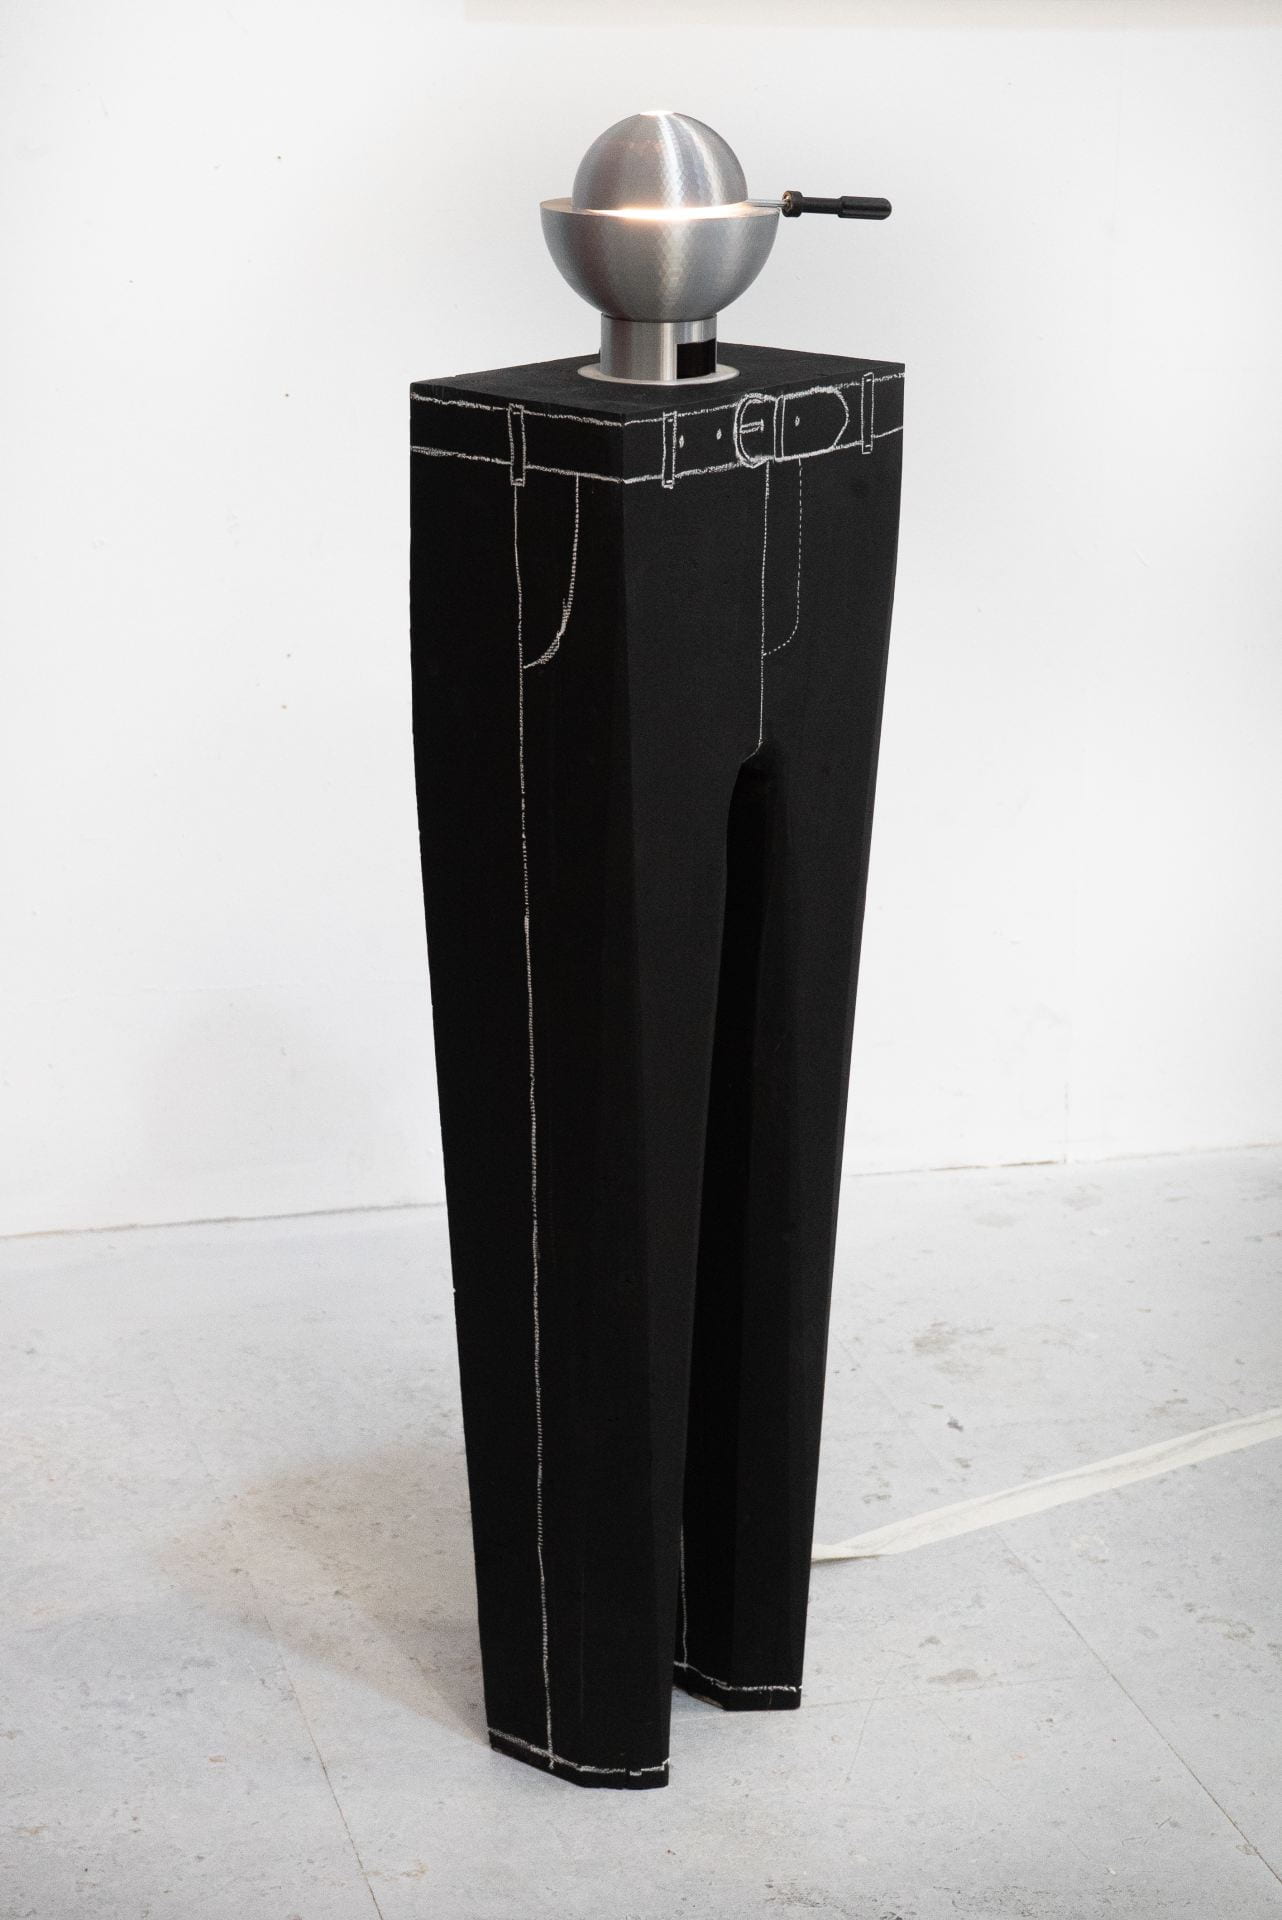 An image of a stiff pair of black trousers with chalk details and a 3D printed lamp on top.